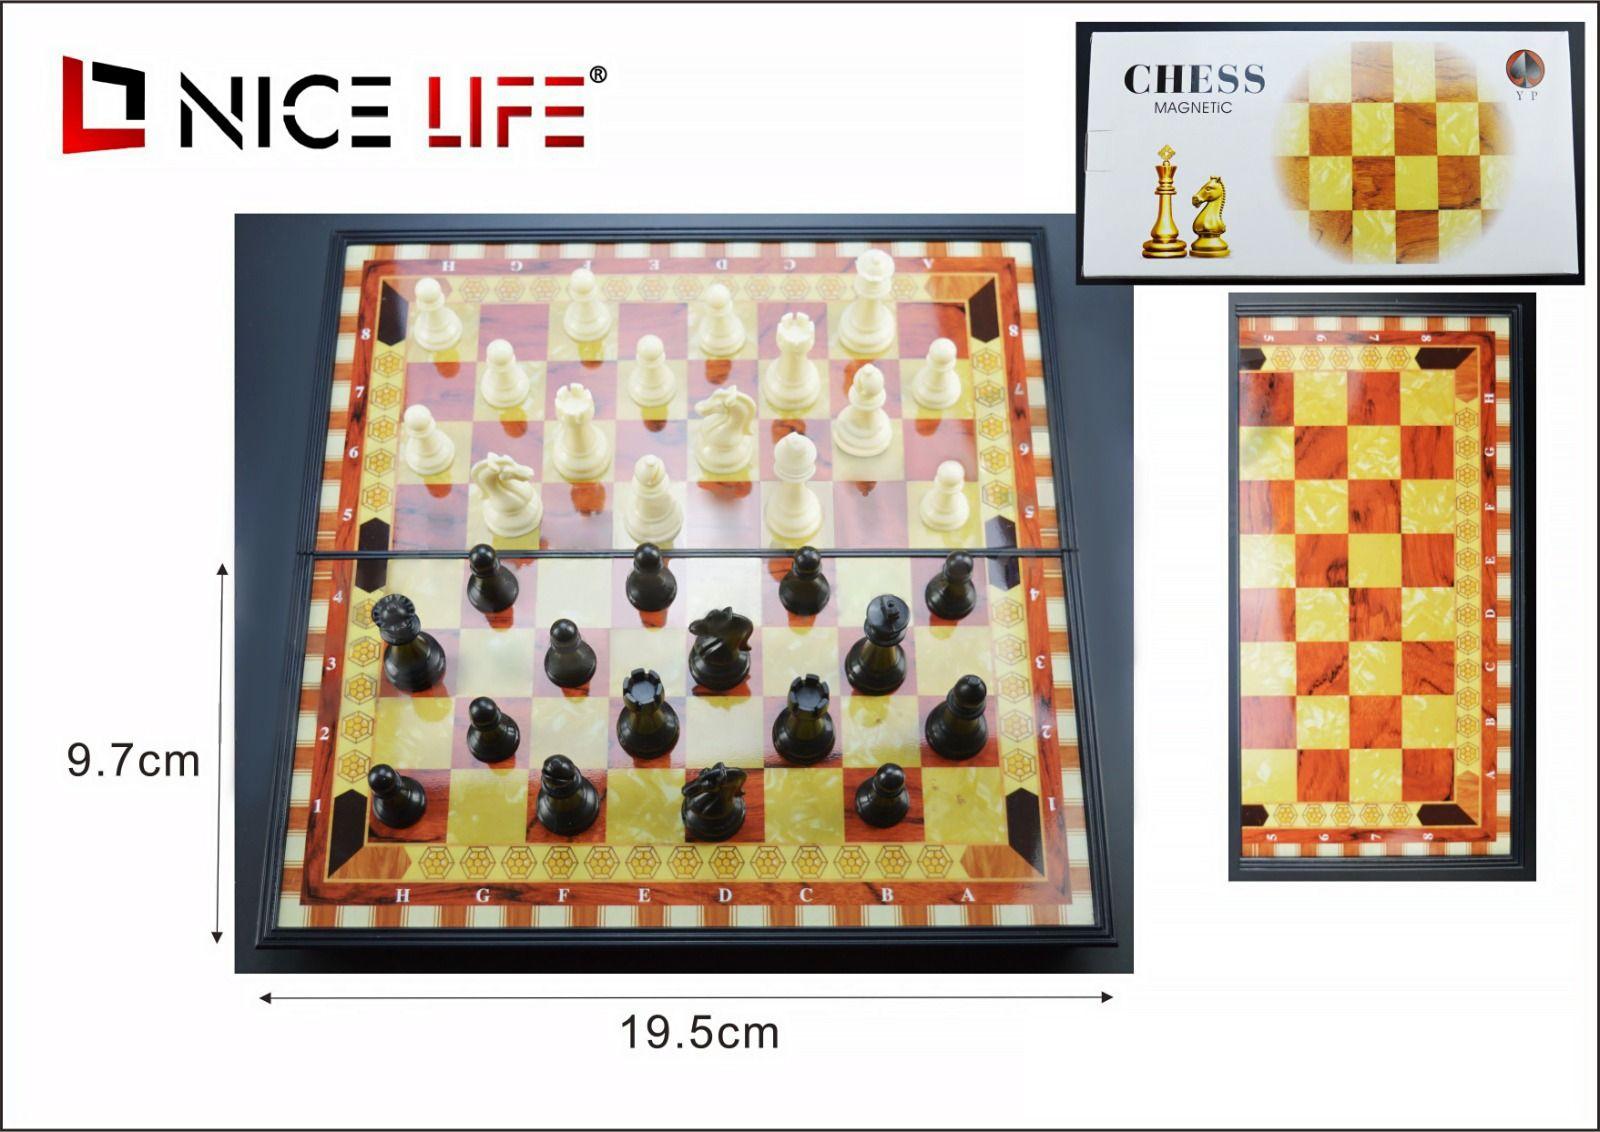 Board game - Chess